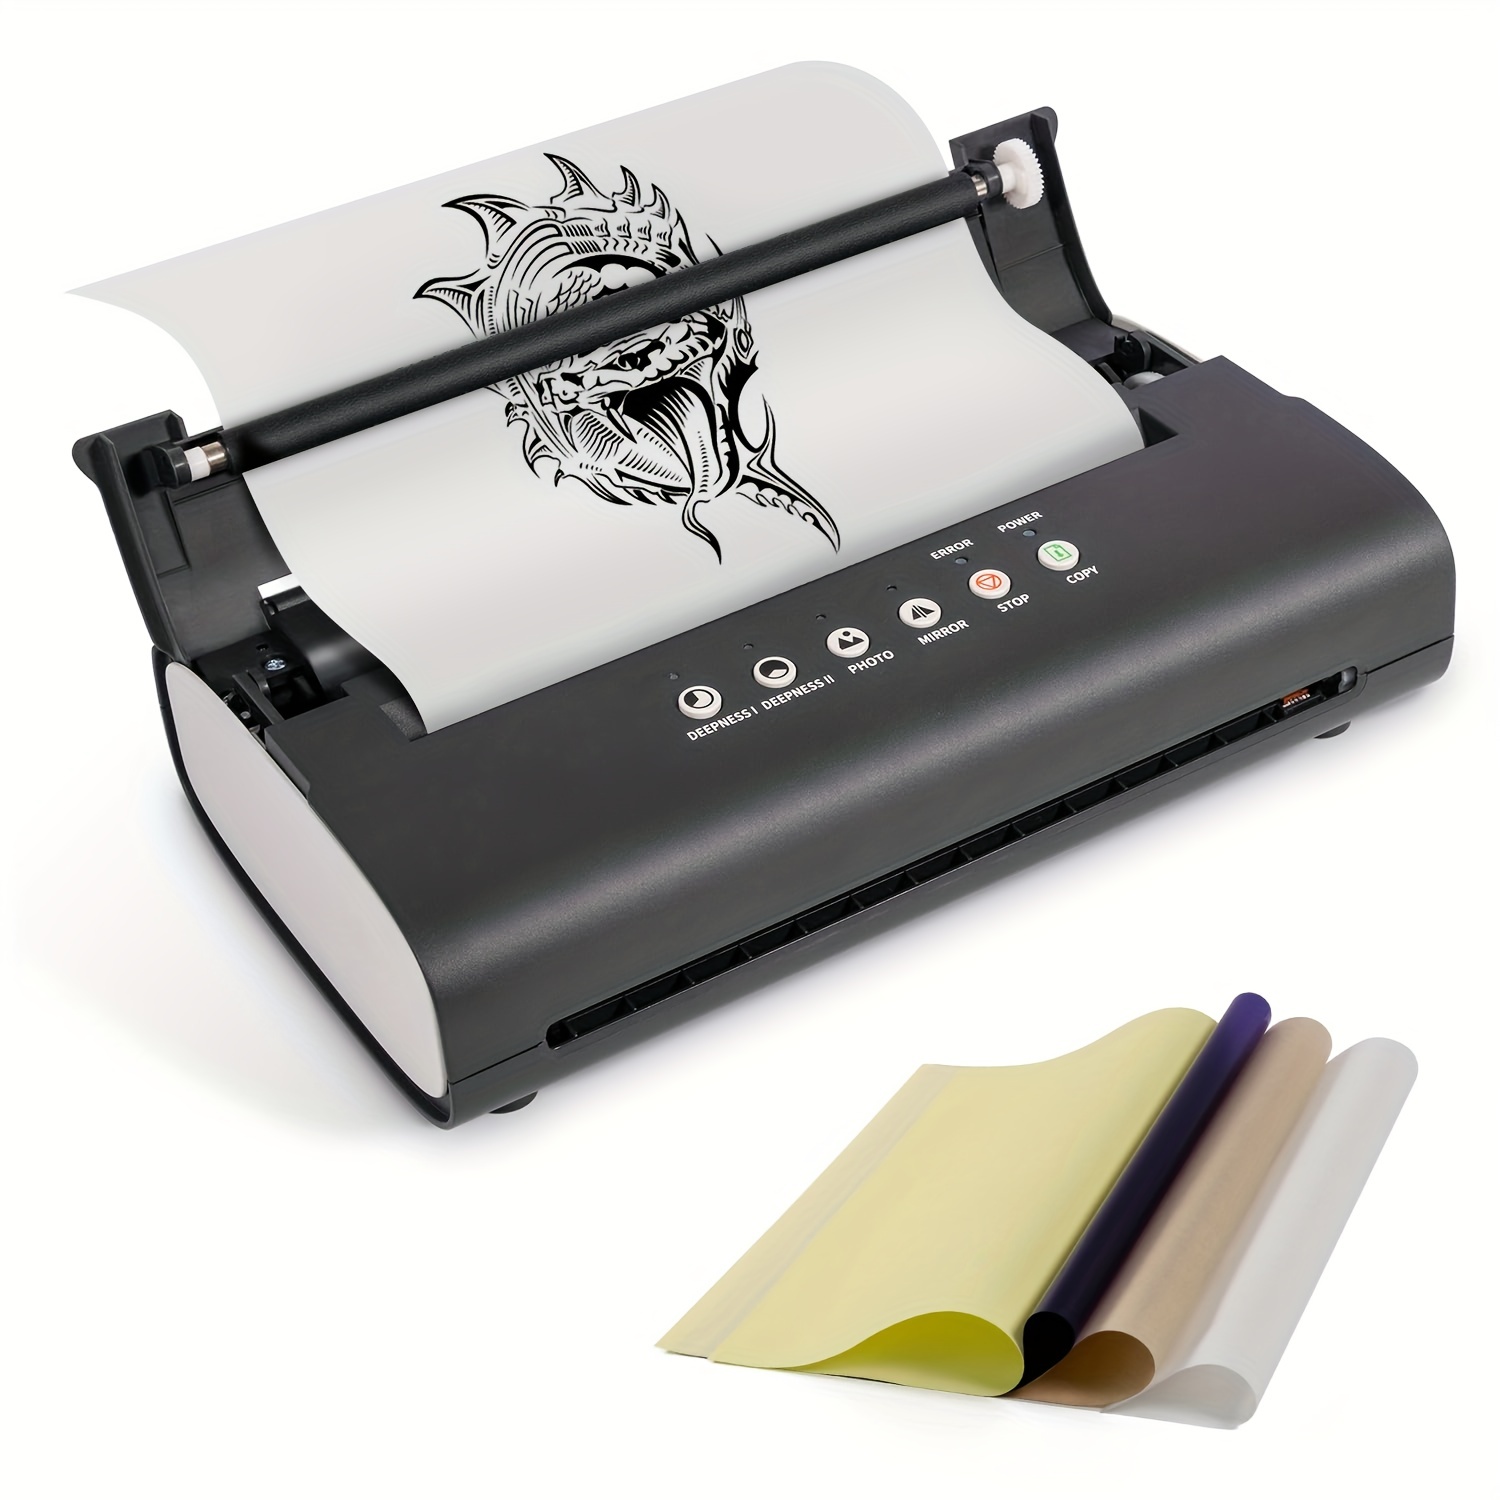 Thermal Printer For Tattoo Stencils